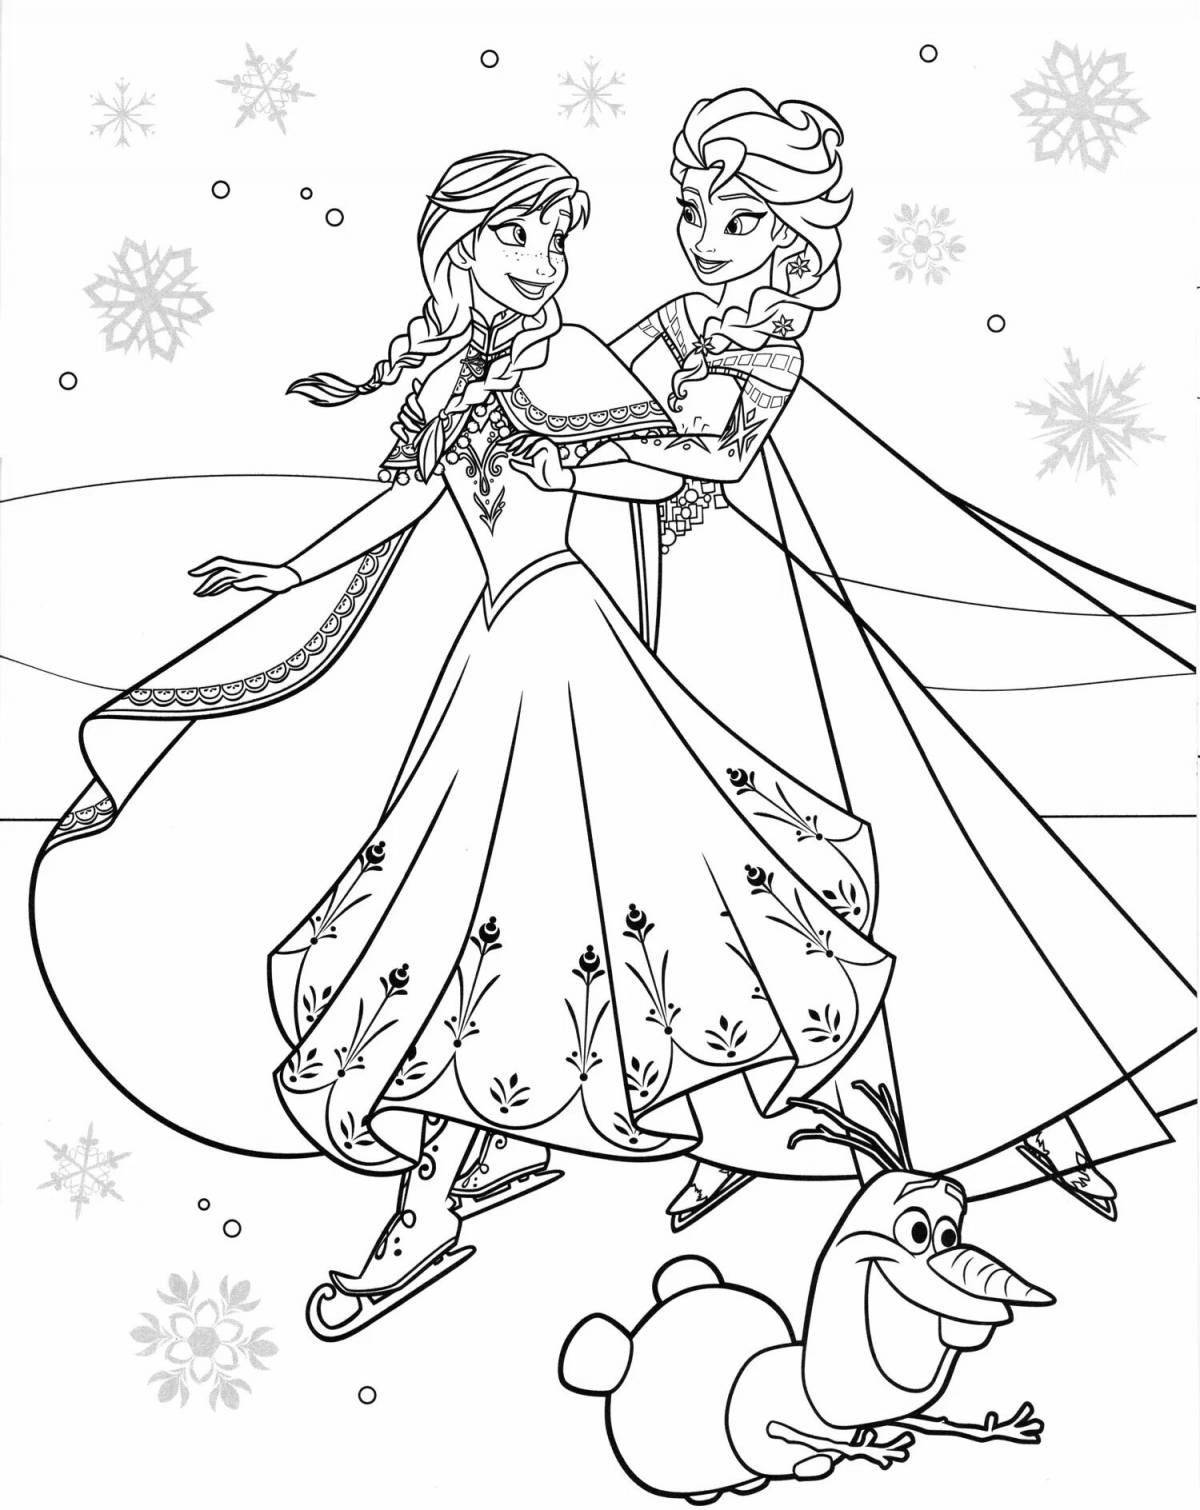 Elsa fairytale coloring book for kids 6-7 years old